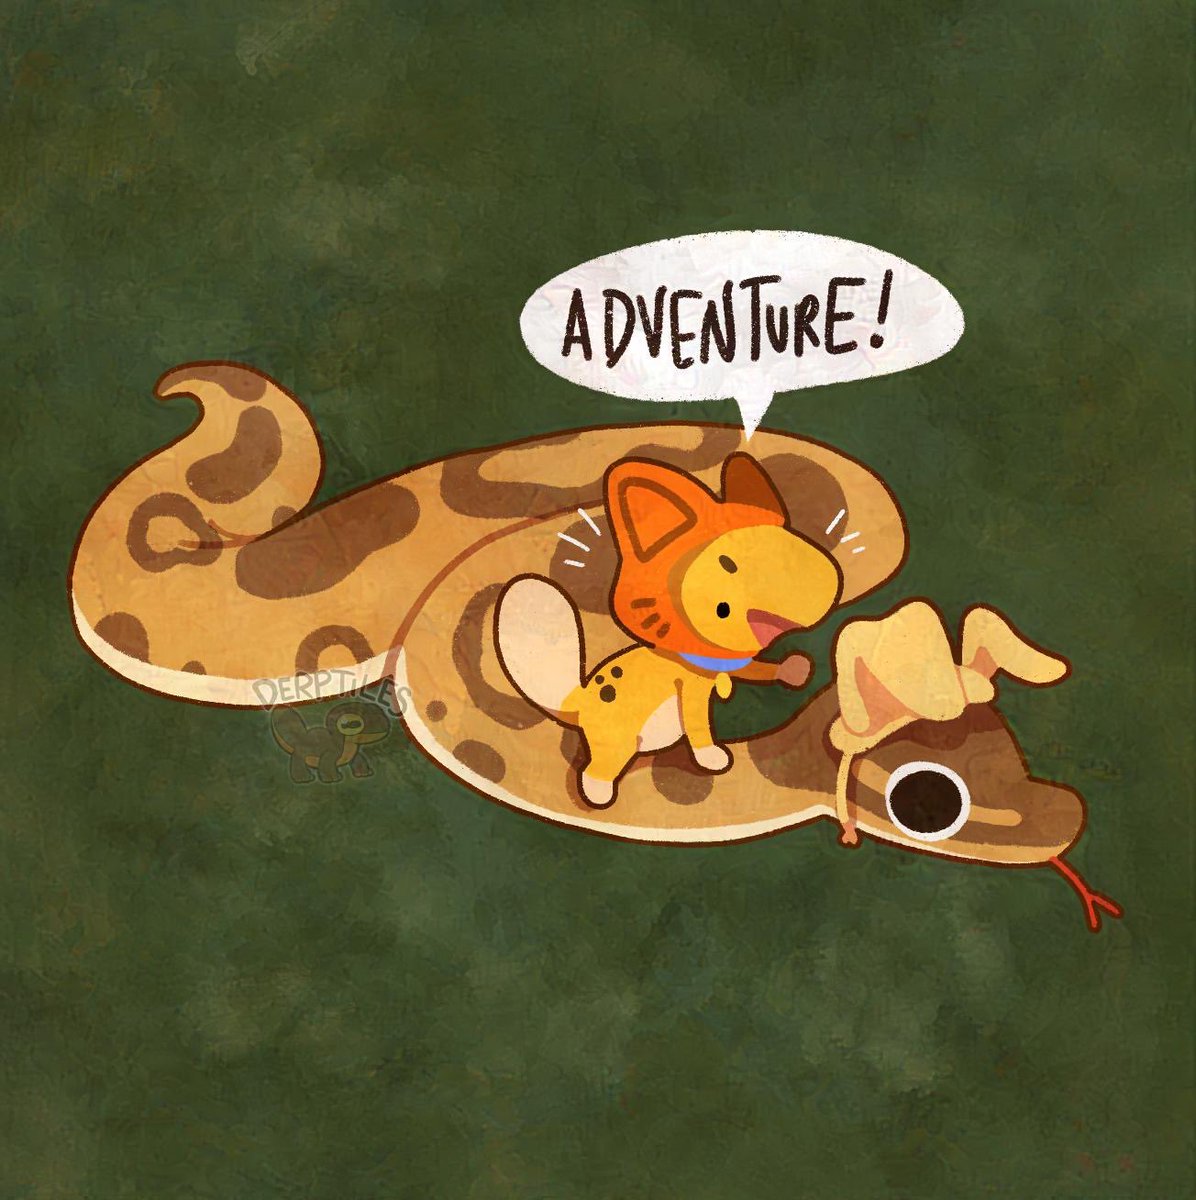 Kitty and Pyuppy going on an adventure!